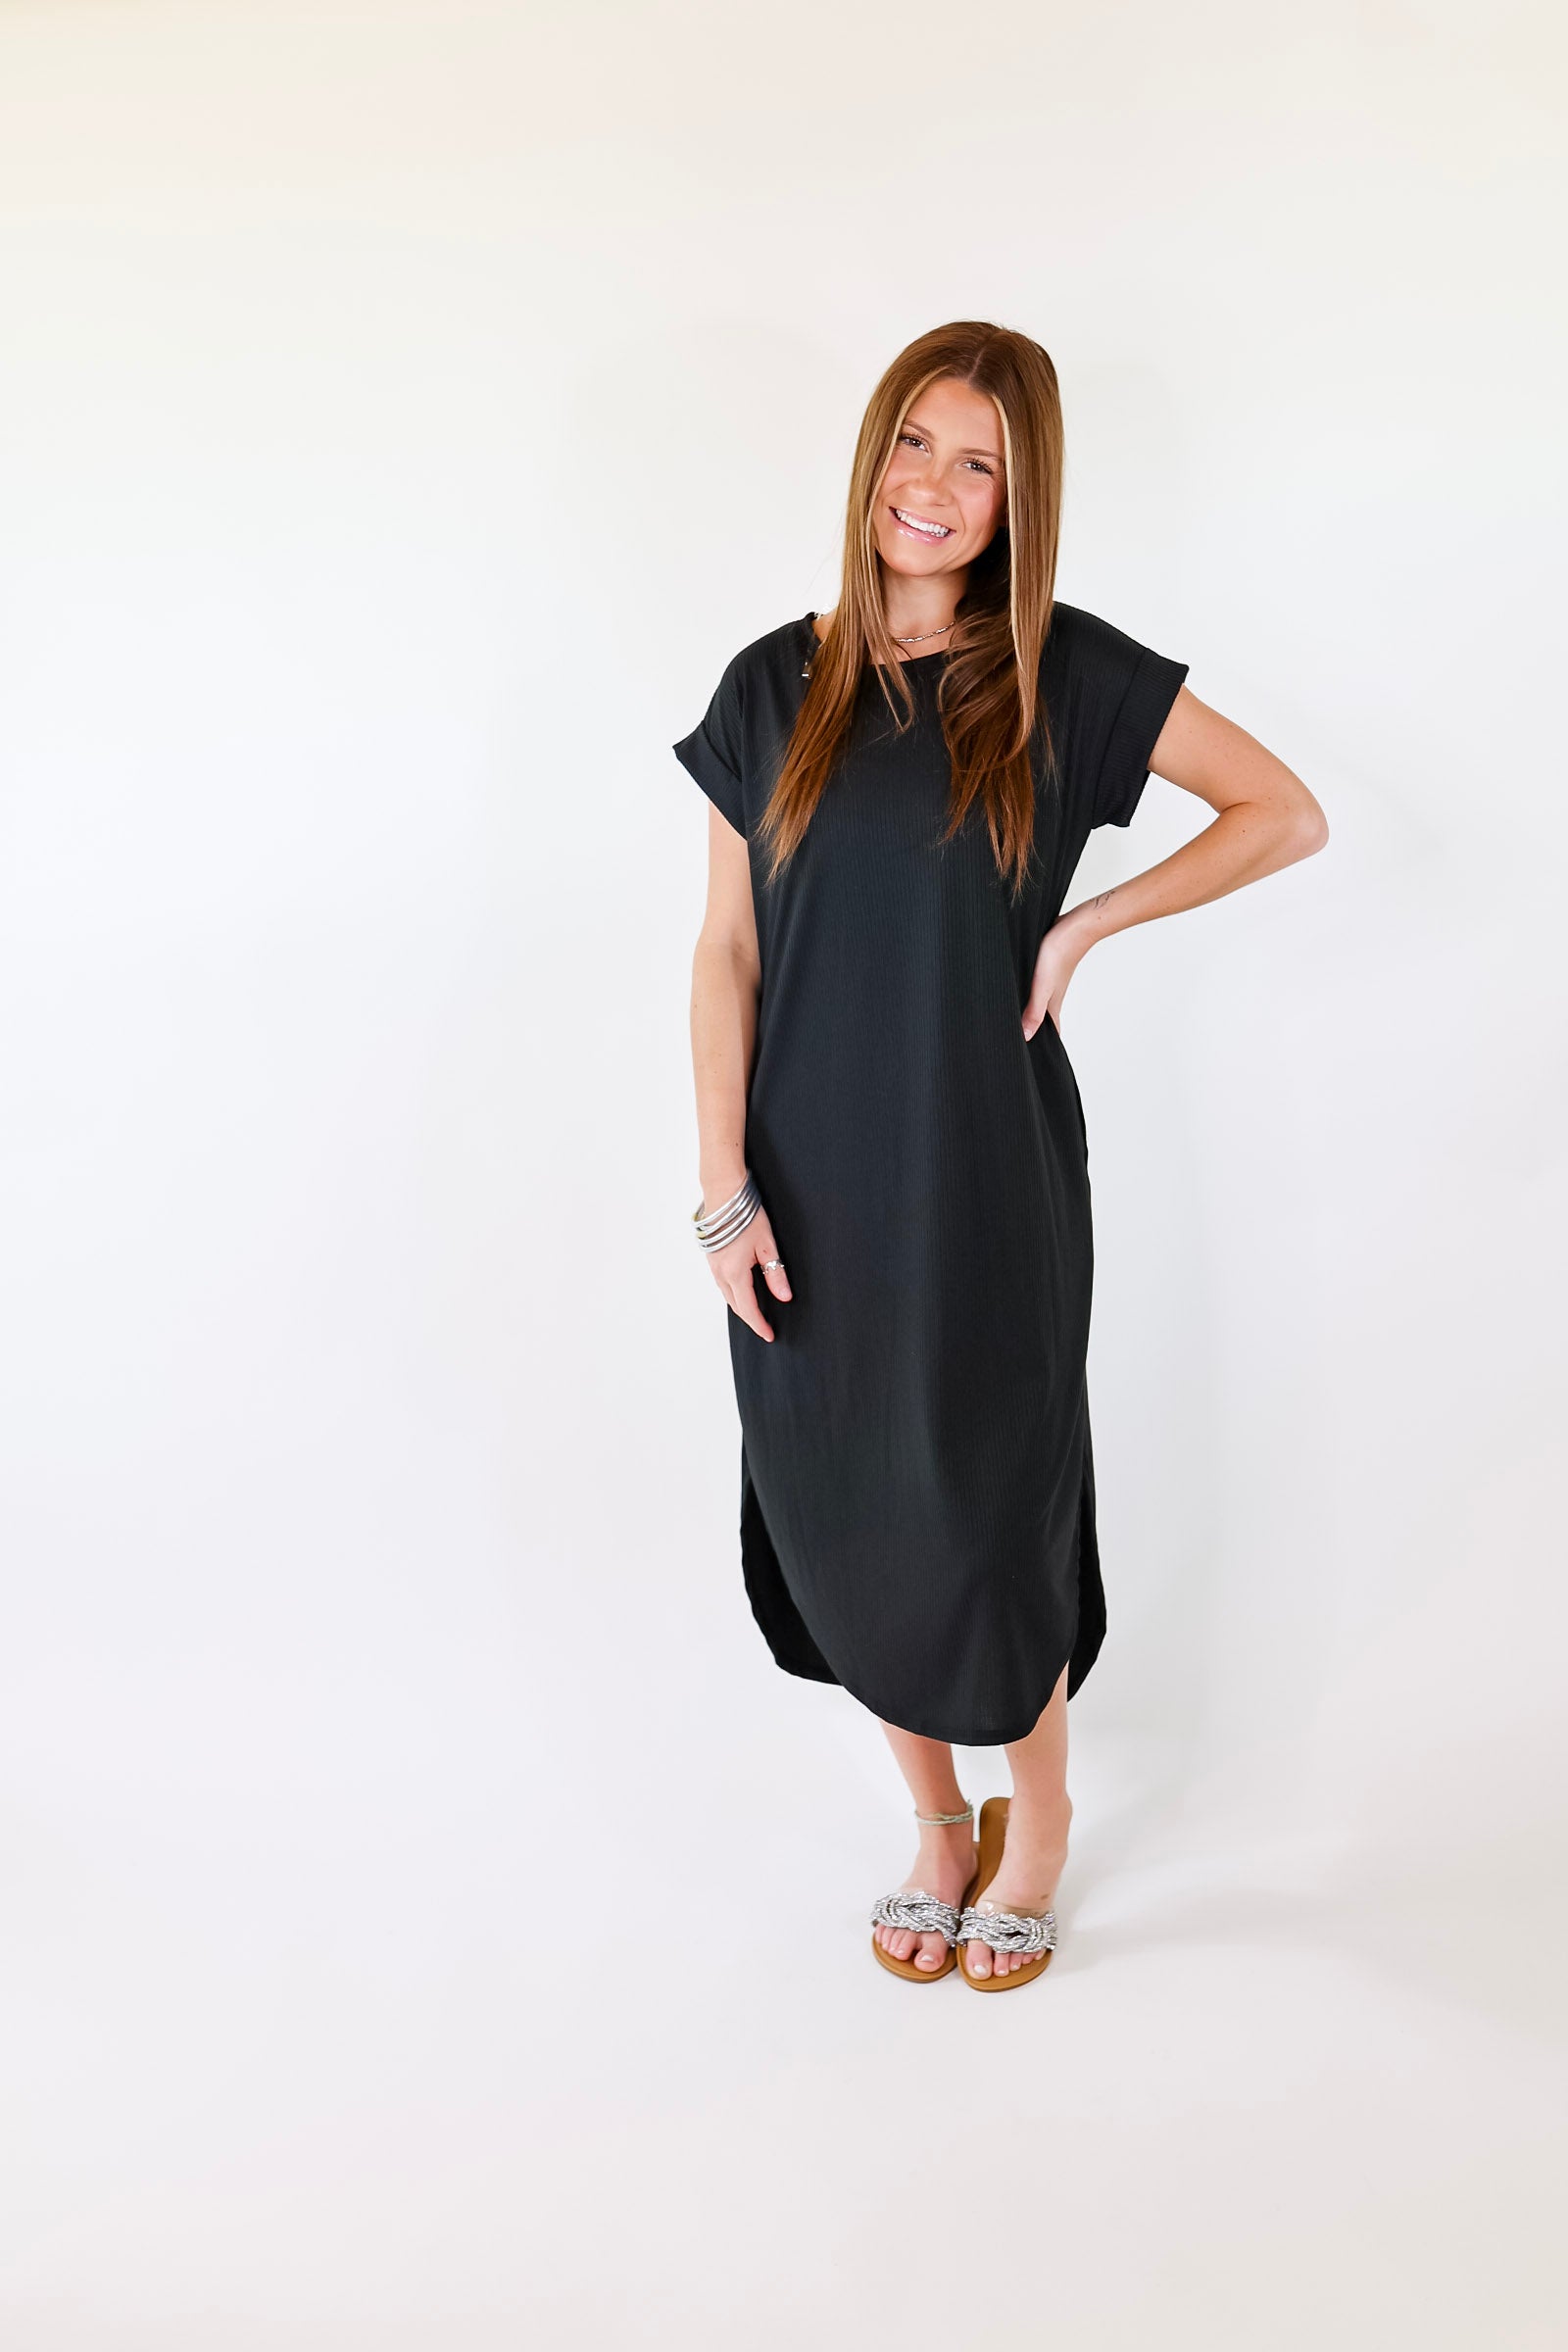 Chill Looks Short Sleeve Thin Ribbed Midi Dress in Black - Giddy Up Glamour Boutique